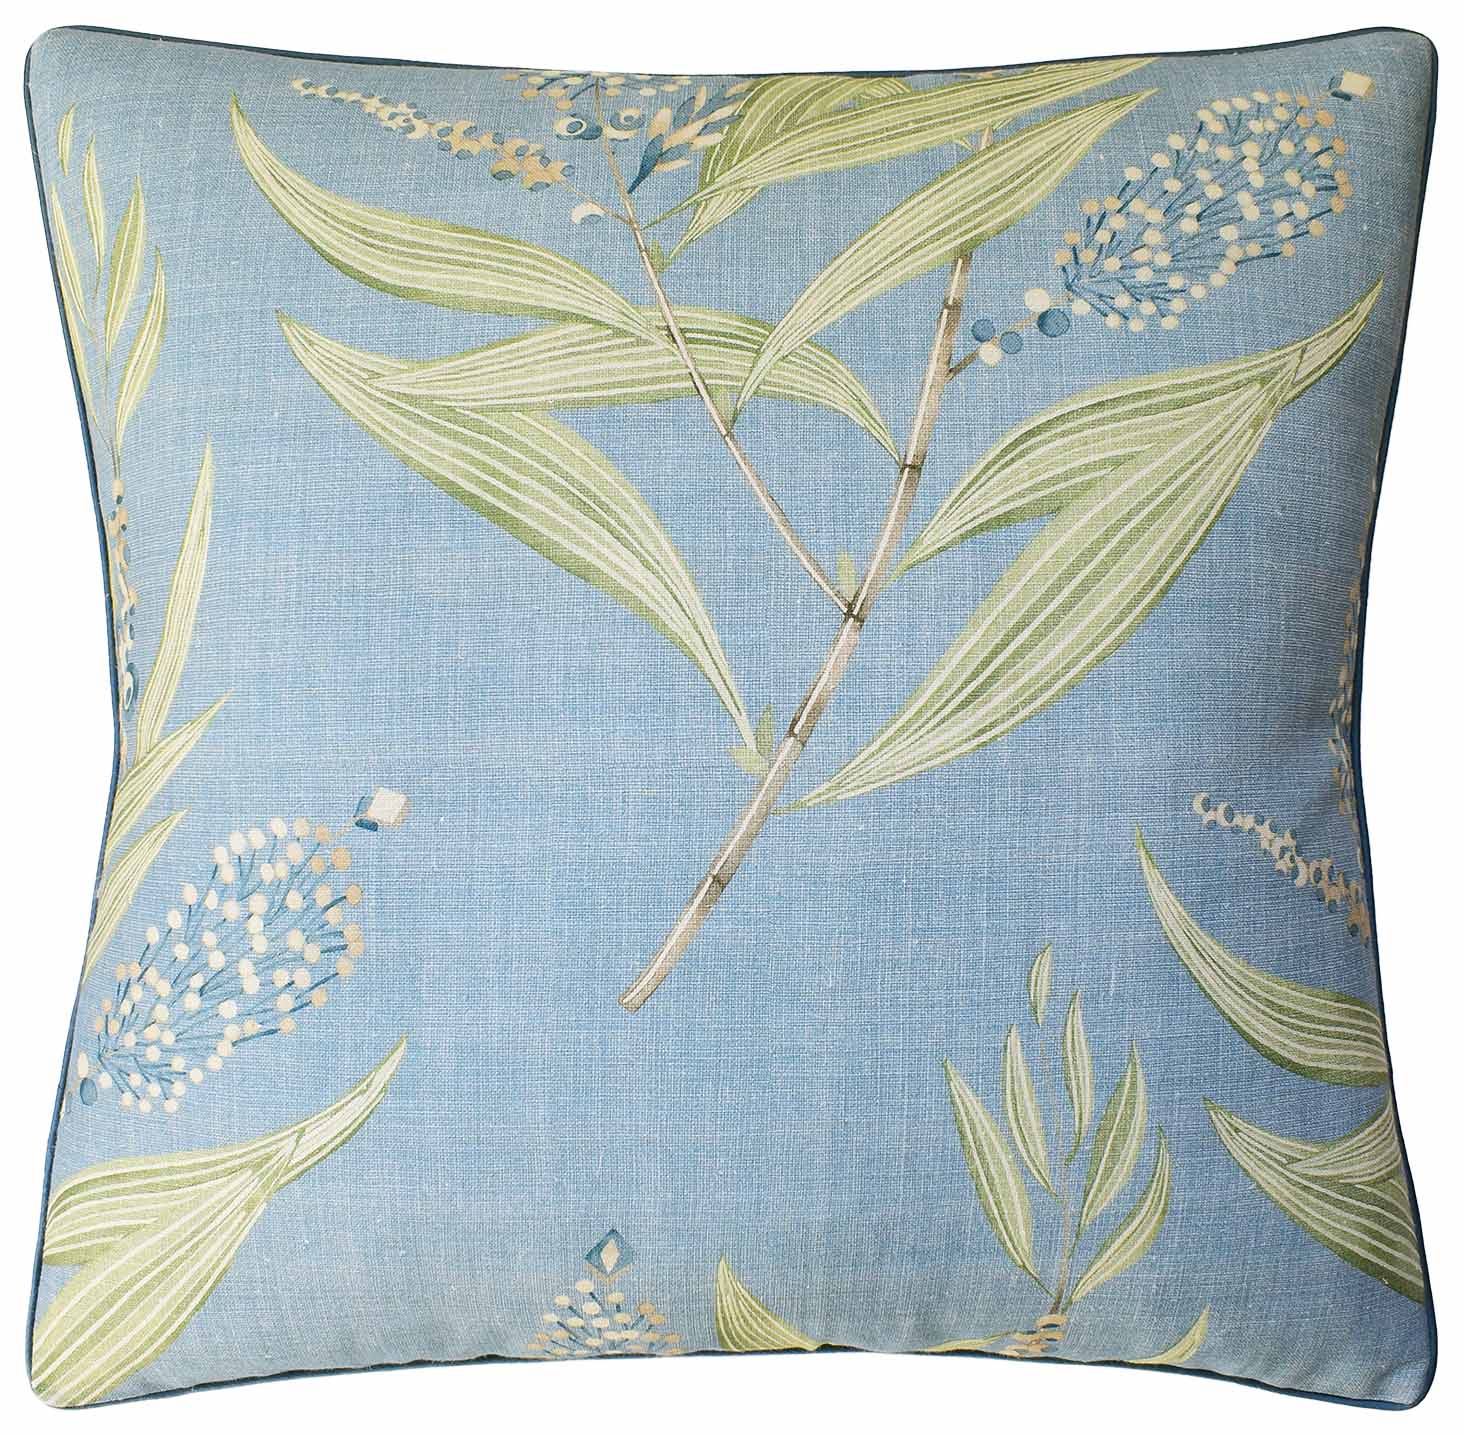 Leaf and Bud Pillow Teal-$335.00